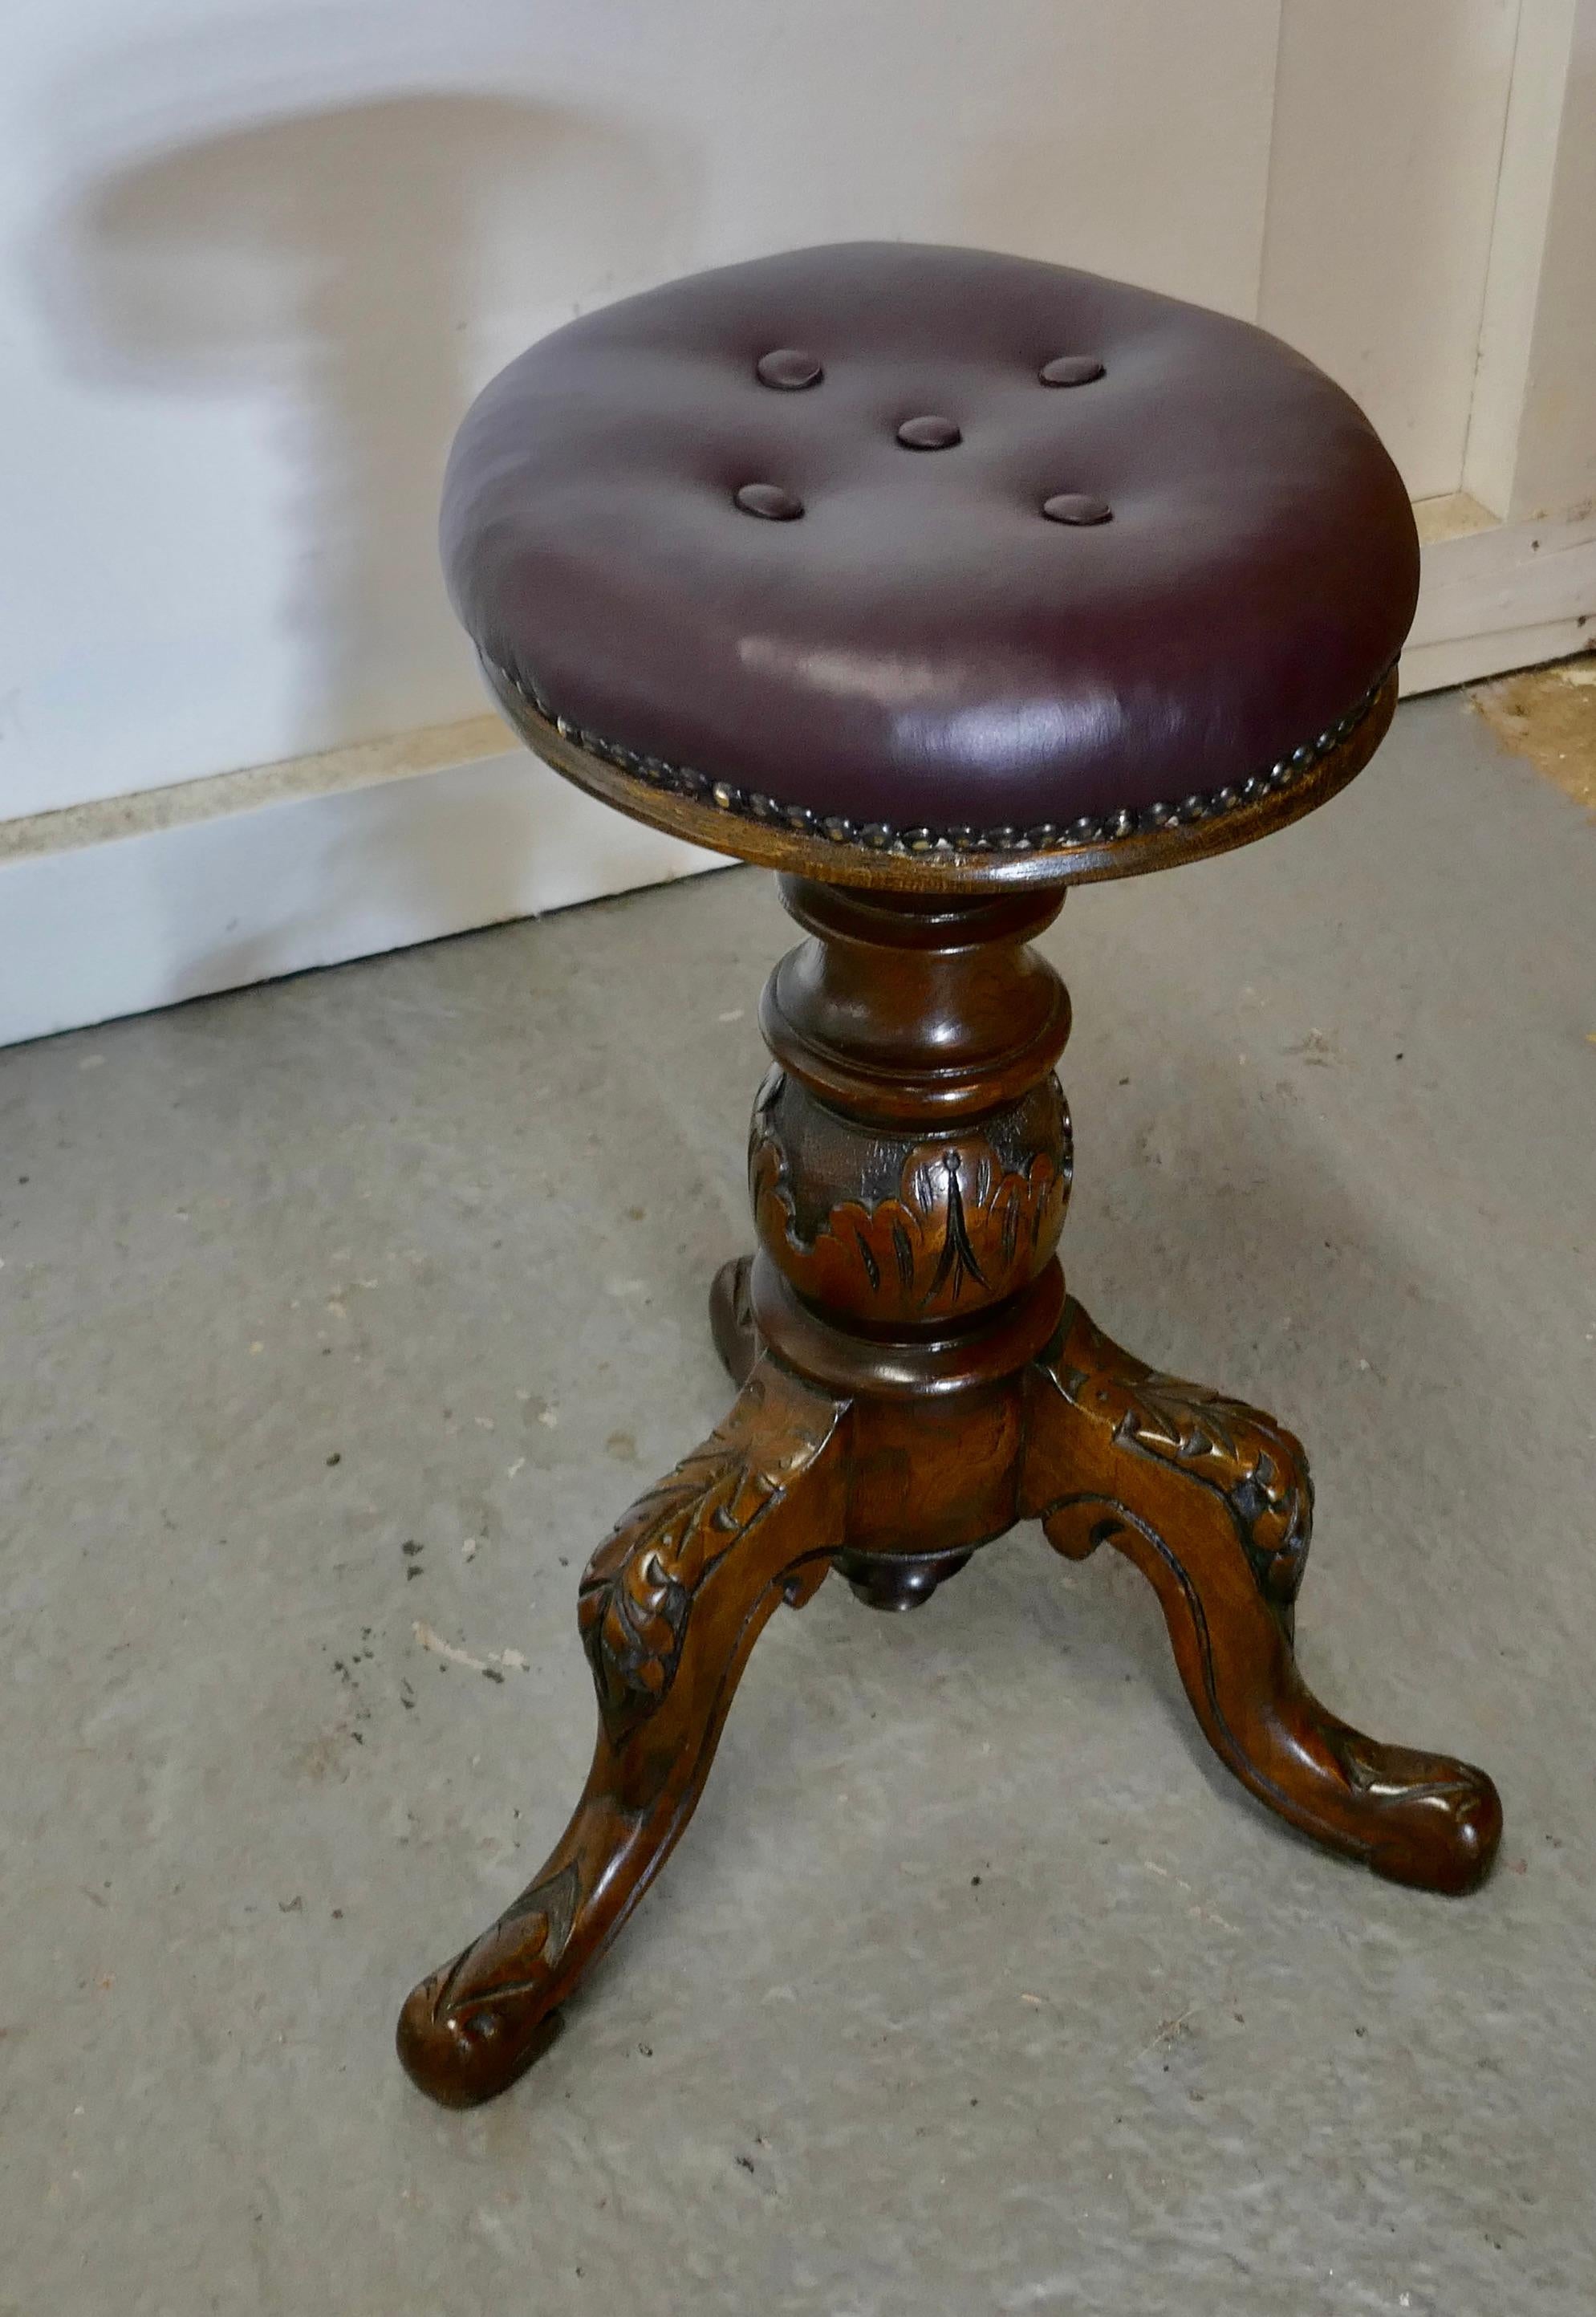 An Elegant Victorian Walnut and Leather Stool 

This is a very attractive and good quality piece, the stool stands on a heavy carved baluster column with 3 feet, the top is button upholstered in burgundy leather
The stool is in very good